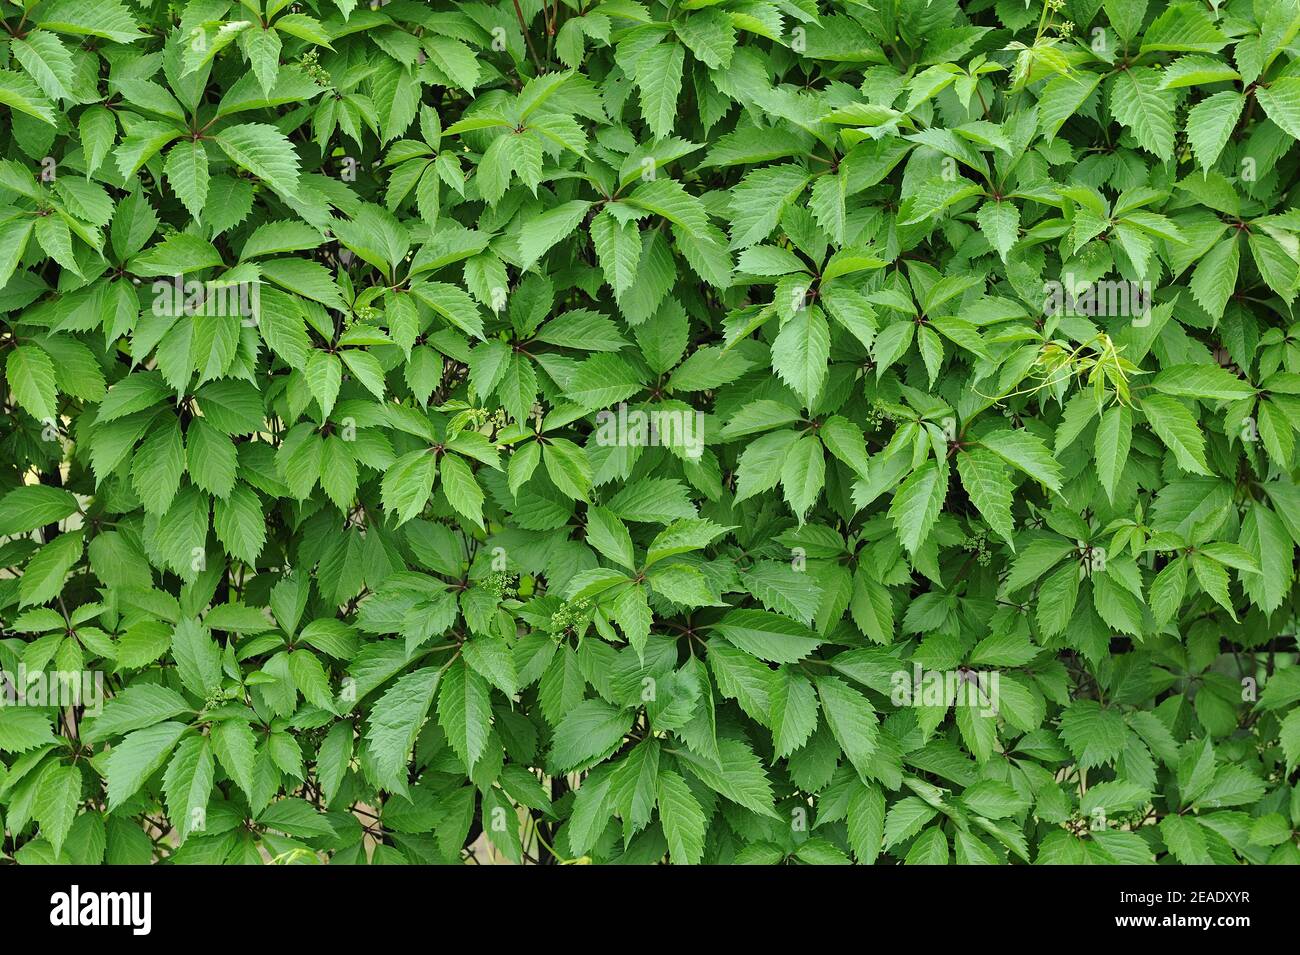 Wall with vibrant green ivy leaves for garden decoration Stock Photo